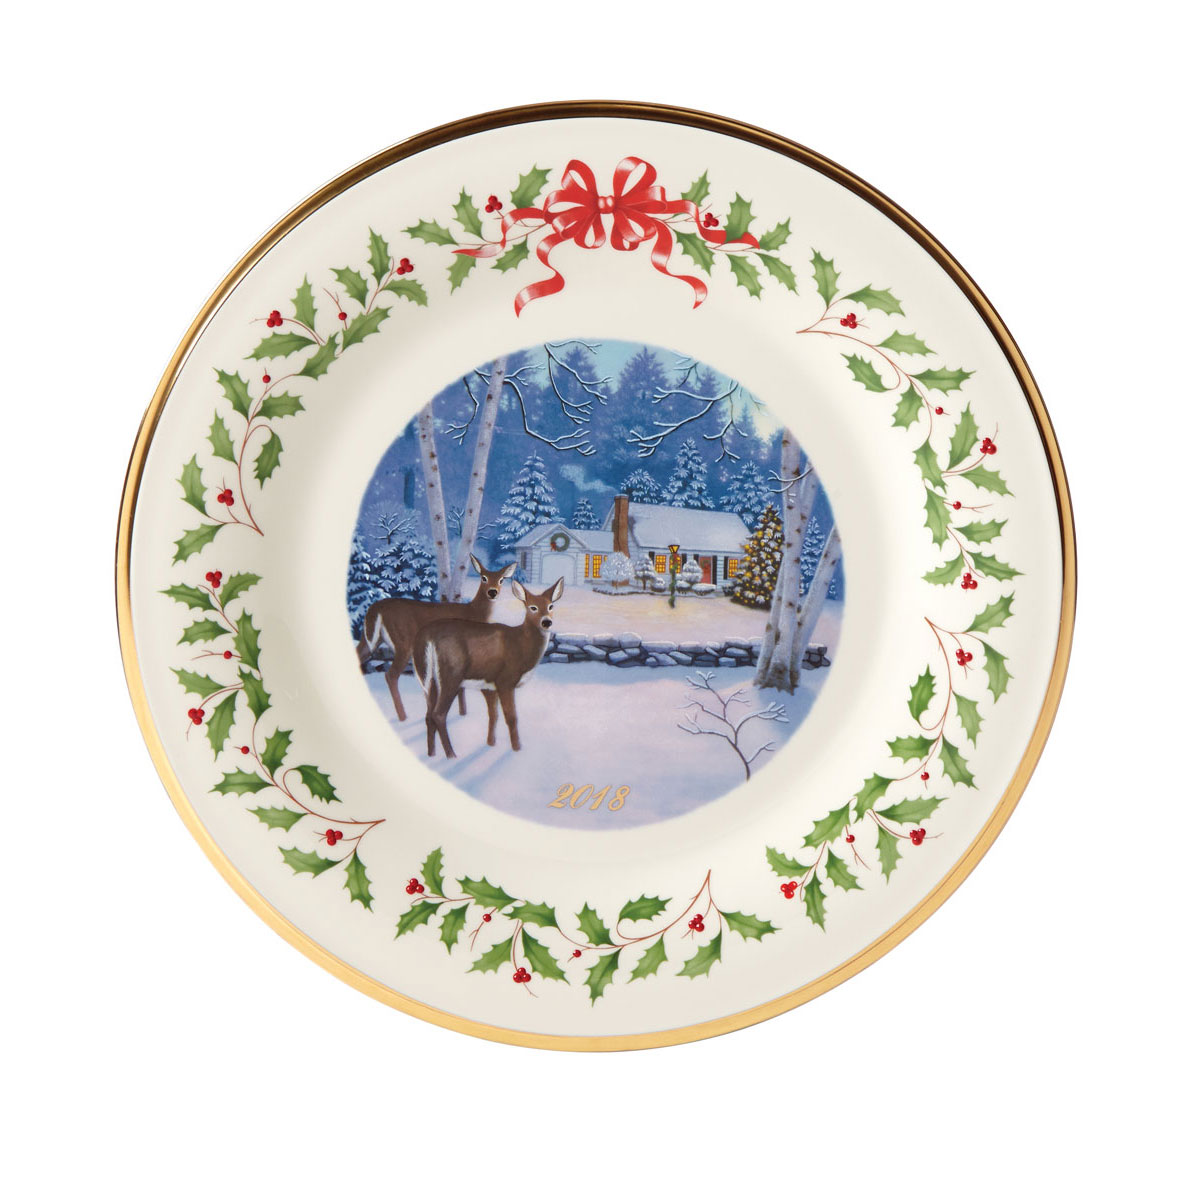 Lenox 2018 Holiday Collectors Plate, 28th Edition - Cabin